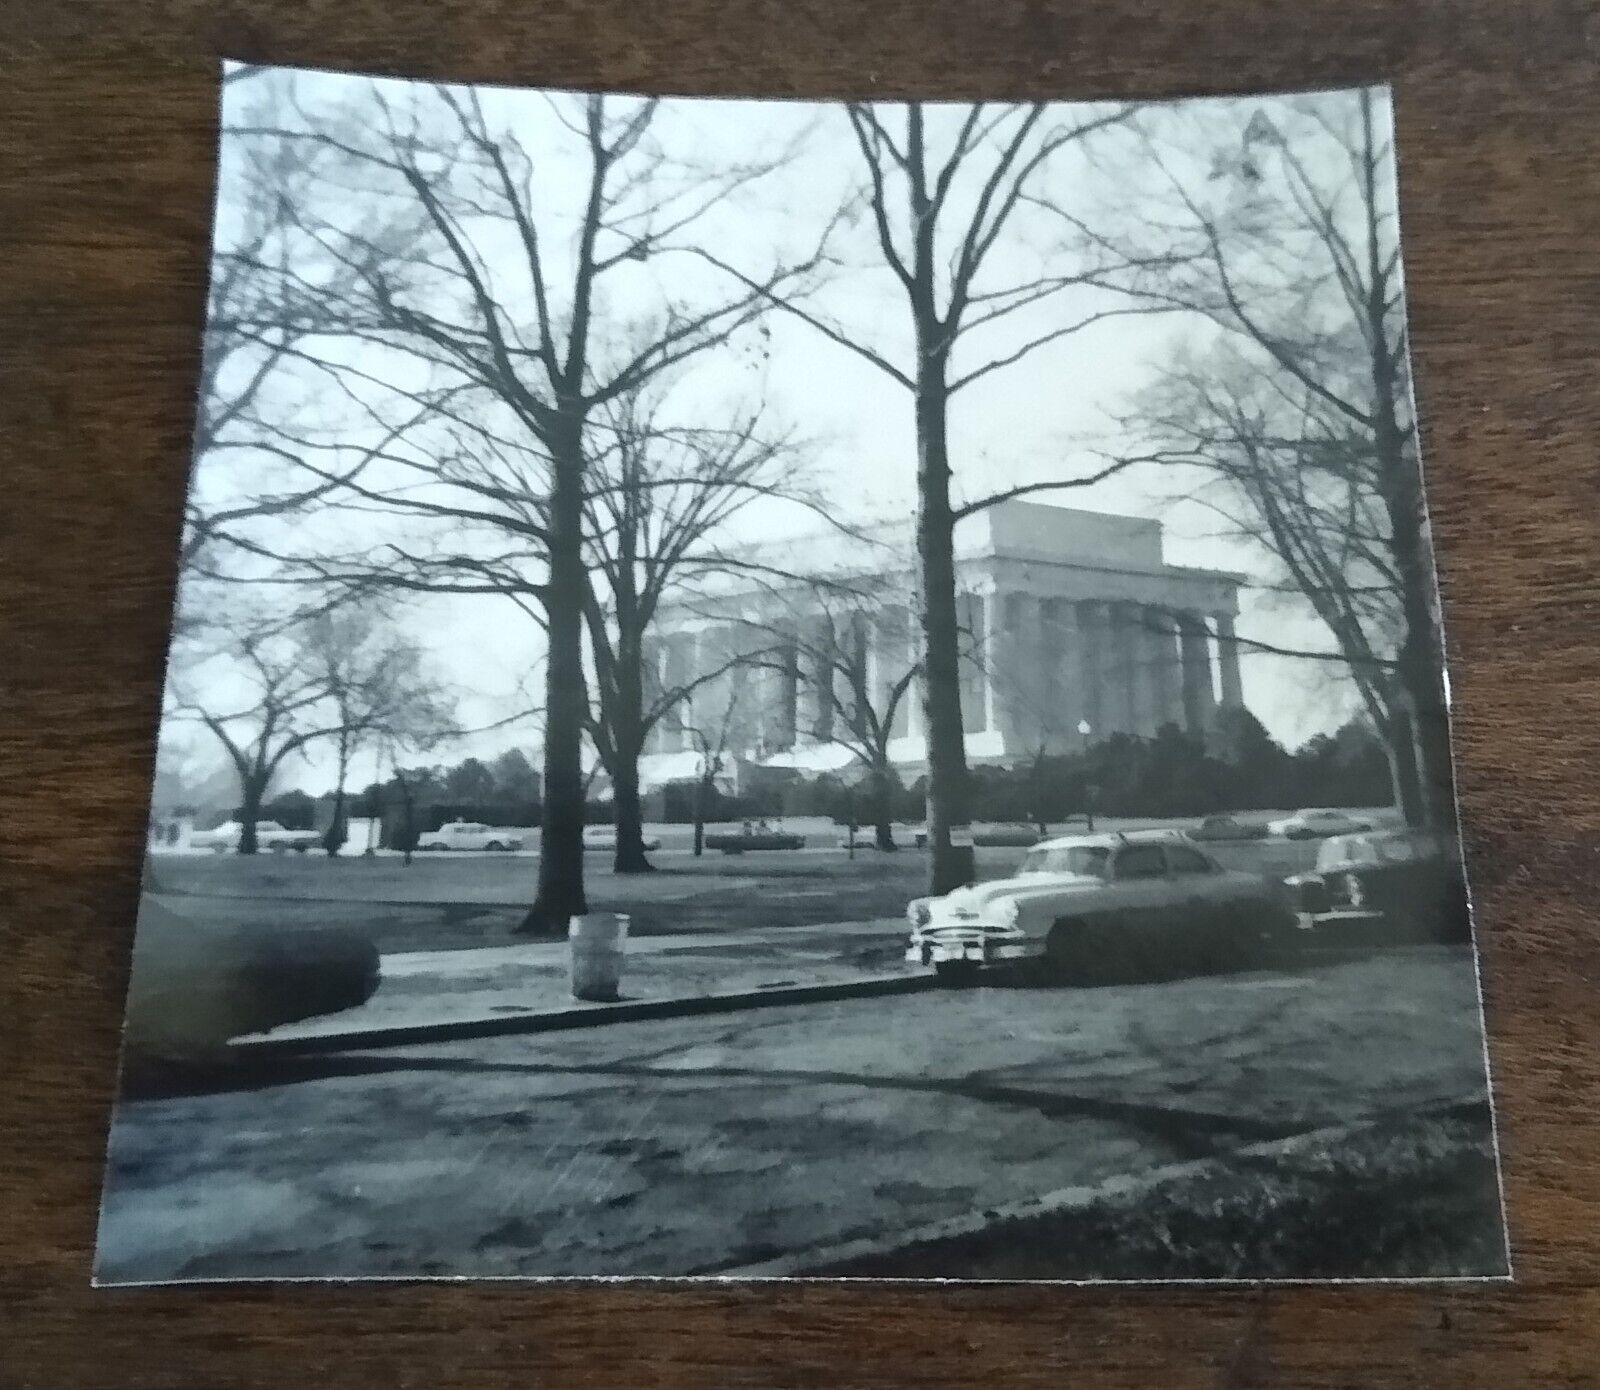 Vintage 1960s Photograph The Lincoln Memorial Washington, D.C. with Old Cars 3\